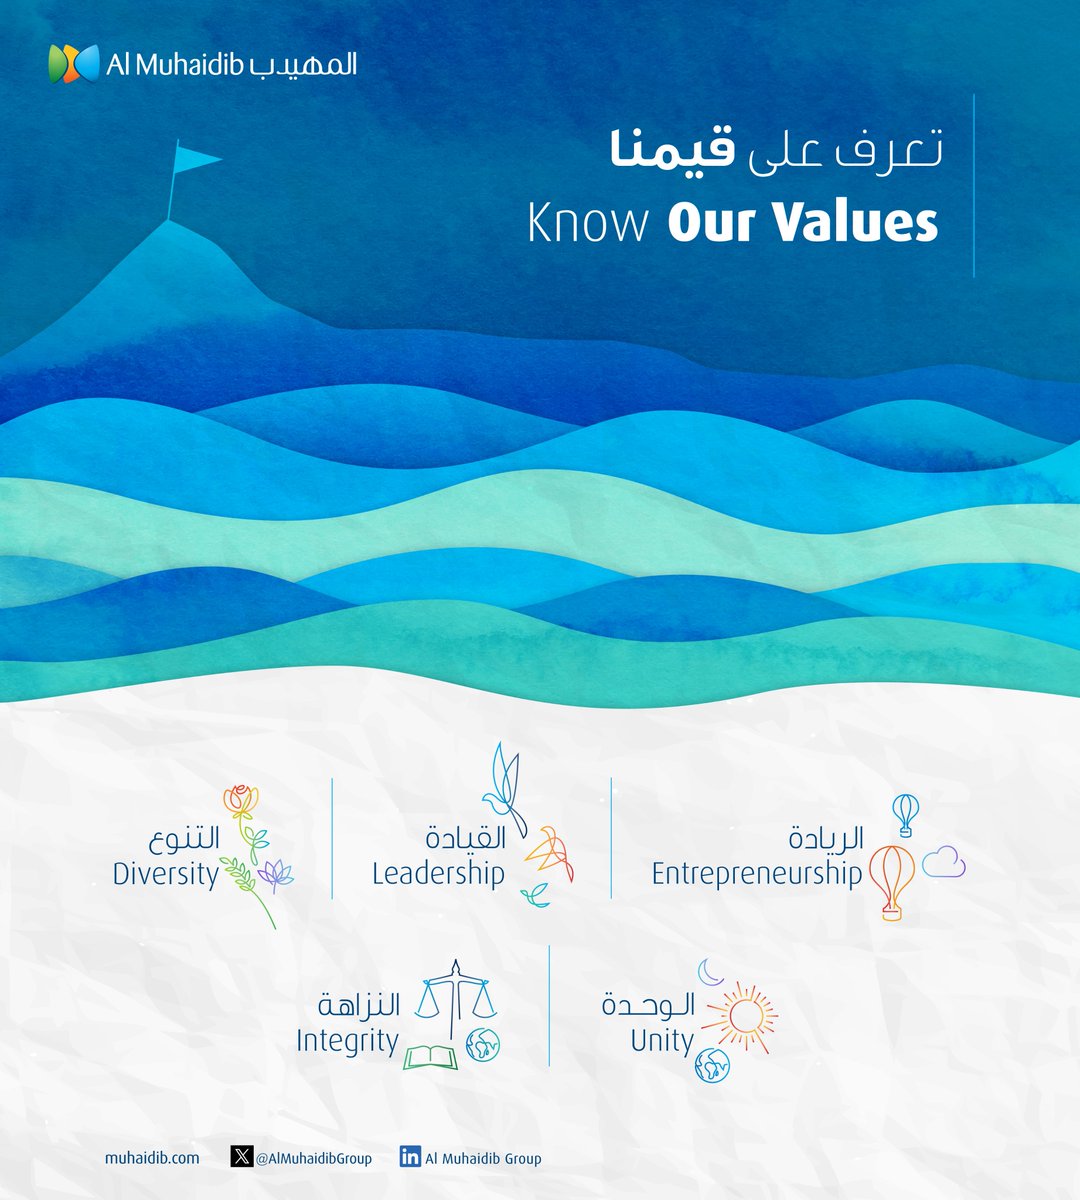 #OurValues are the unwavering principles that we choose to guide our choices  and decisions.

We are inspired everyday by our team’s commitment to living by the values that we revere.

#AlMuhaidibGroup #OurIdentity